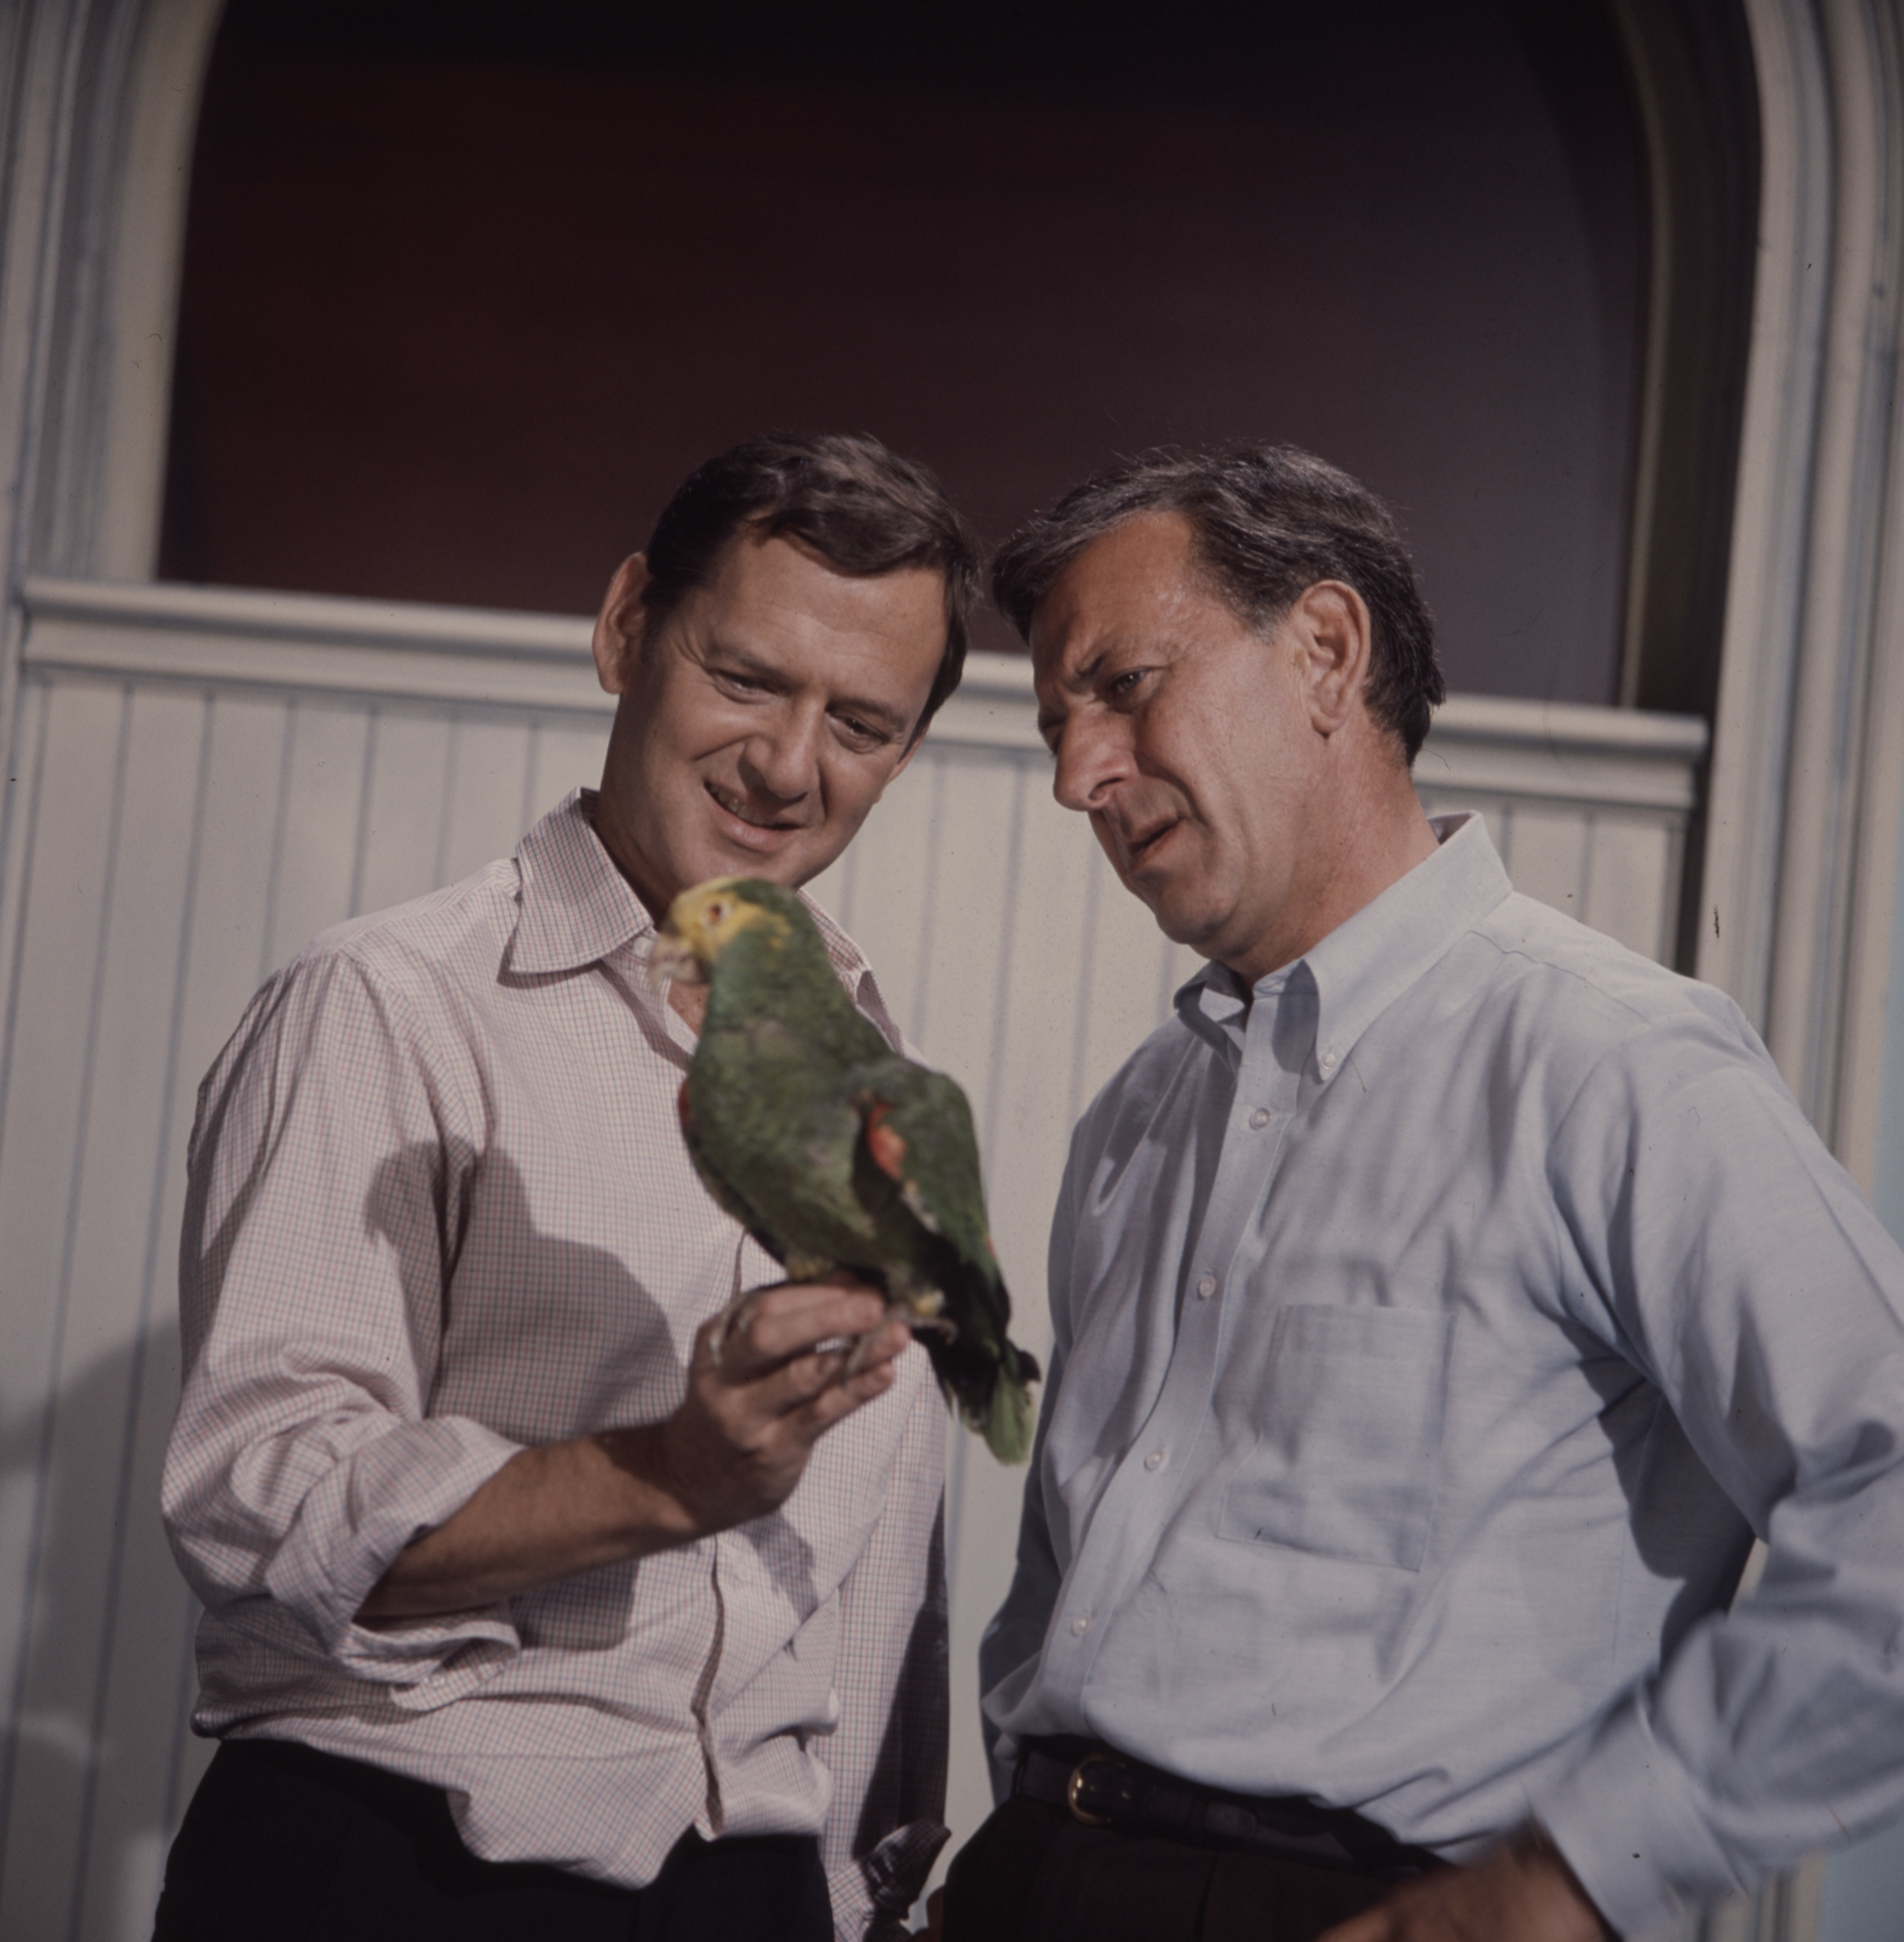 A promotional photo for The Odd Couple, which shows the lead actors staring at a bird